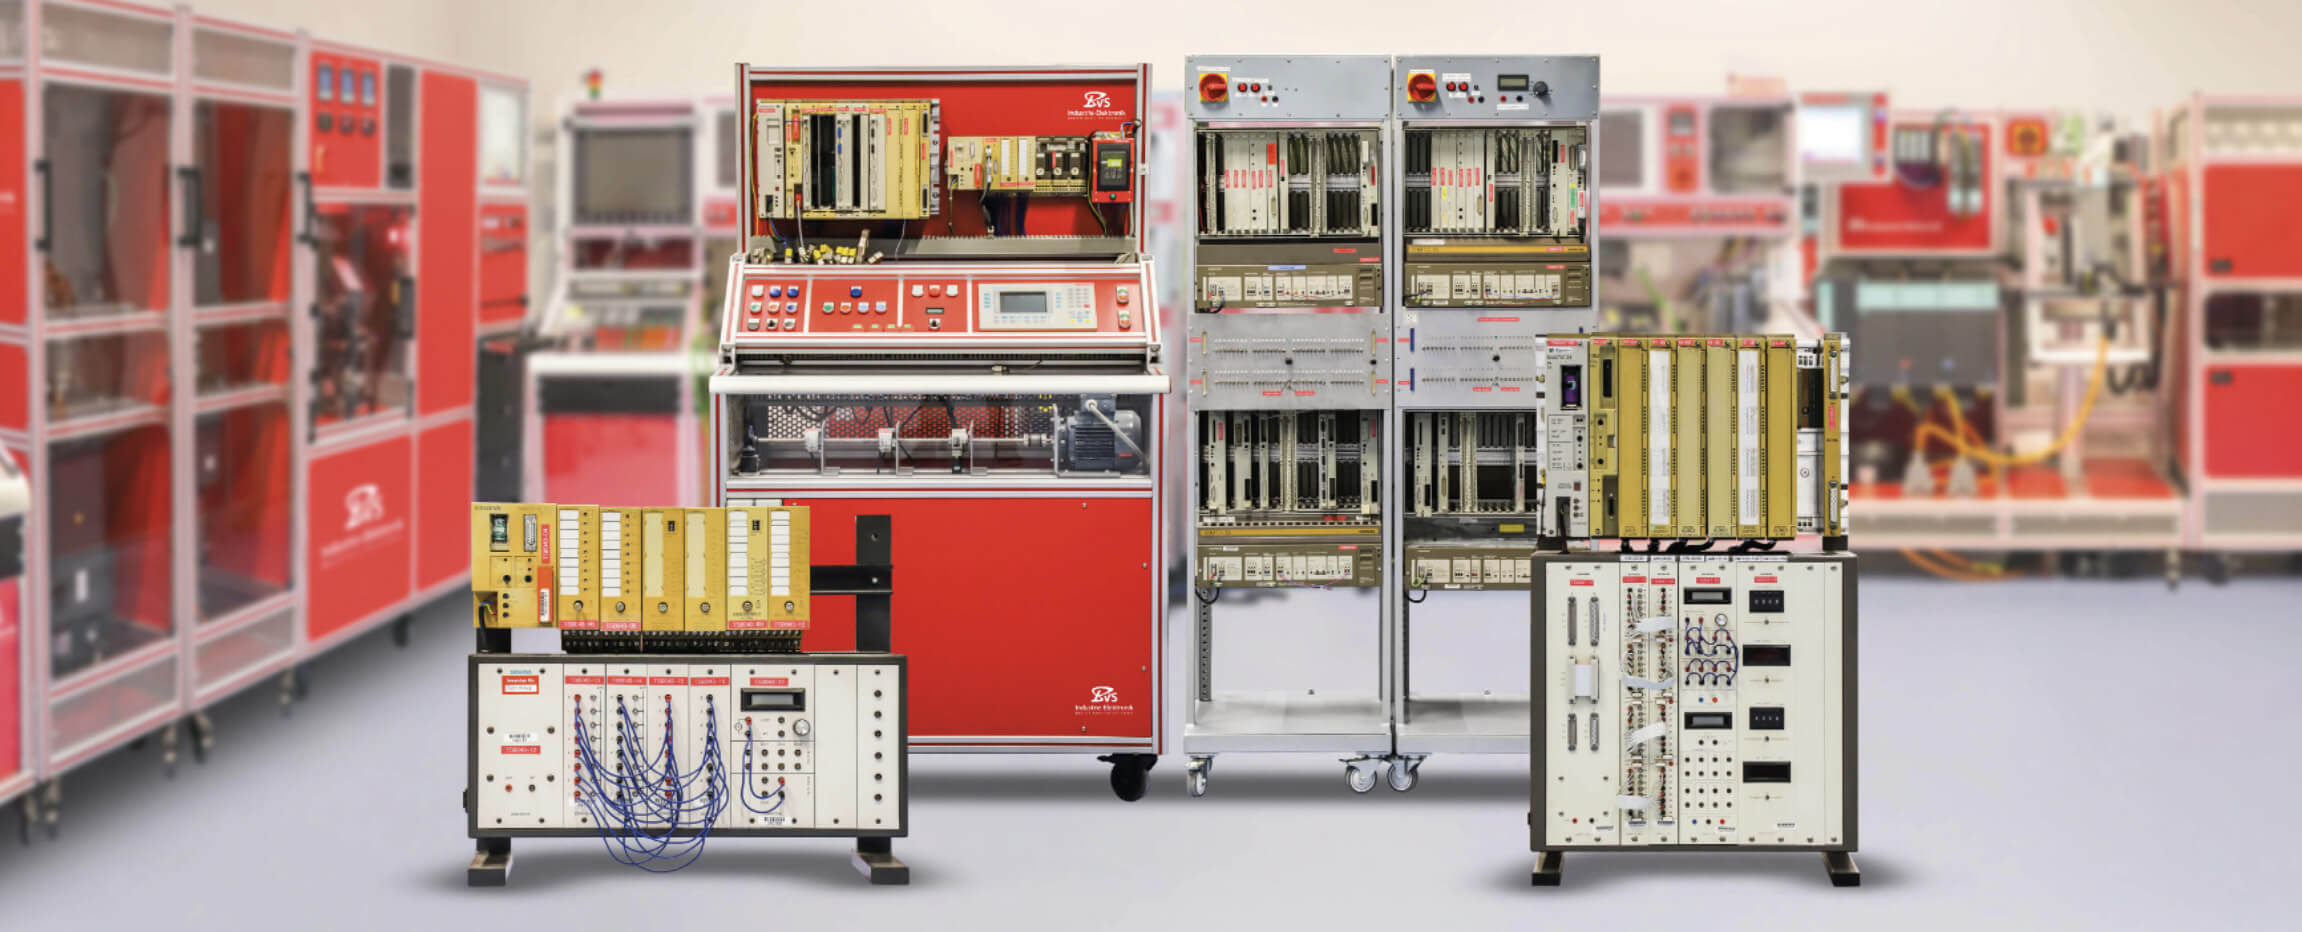 Our Promise of Quality - Test Stands - BVS Industrie-Elektronik